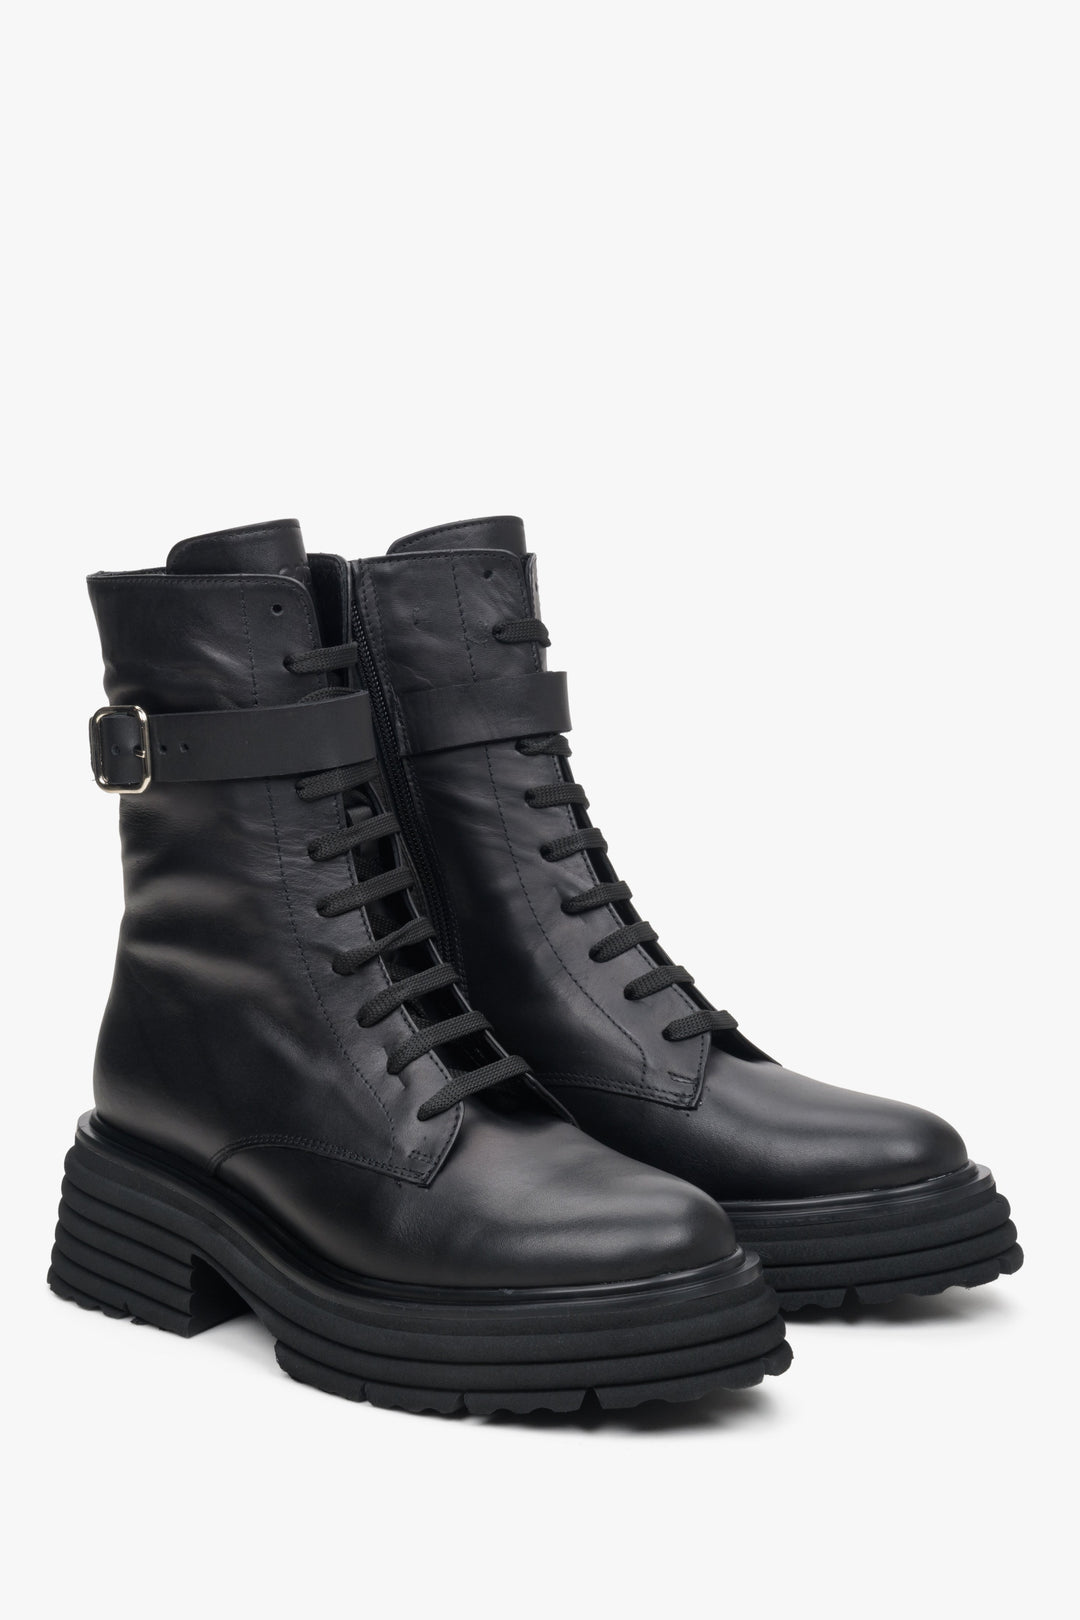 Women's black leather ankle boots with decorative strap by Estro.